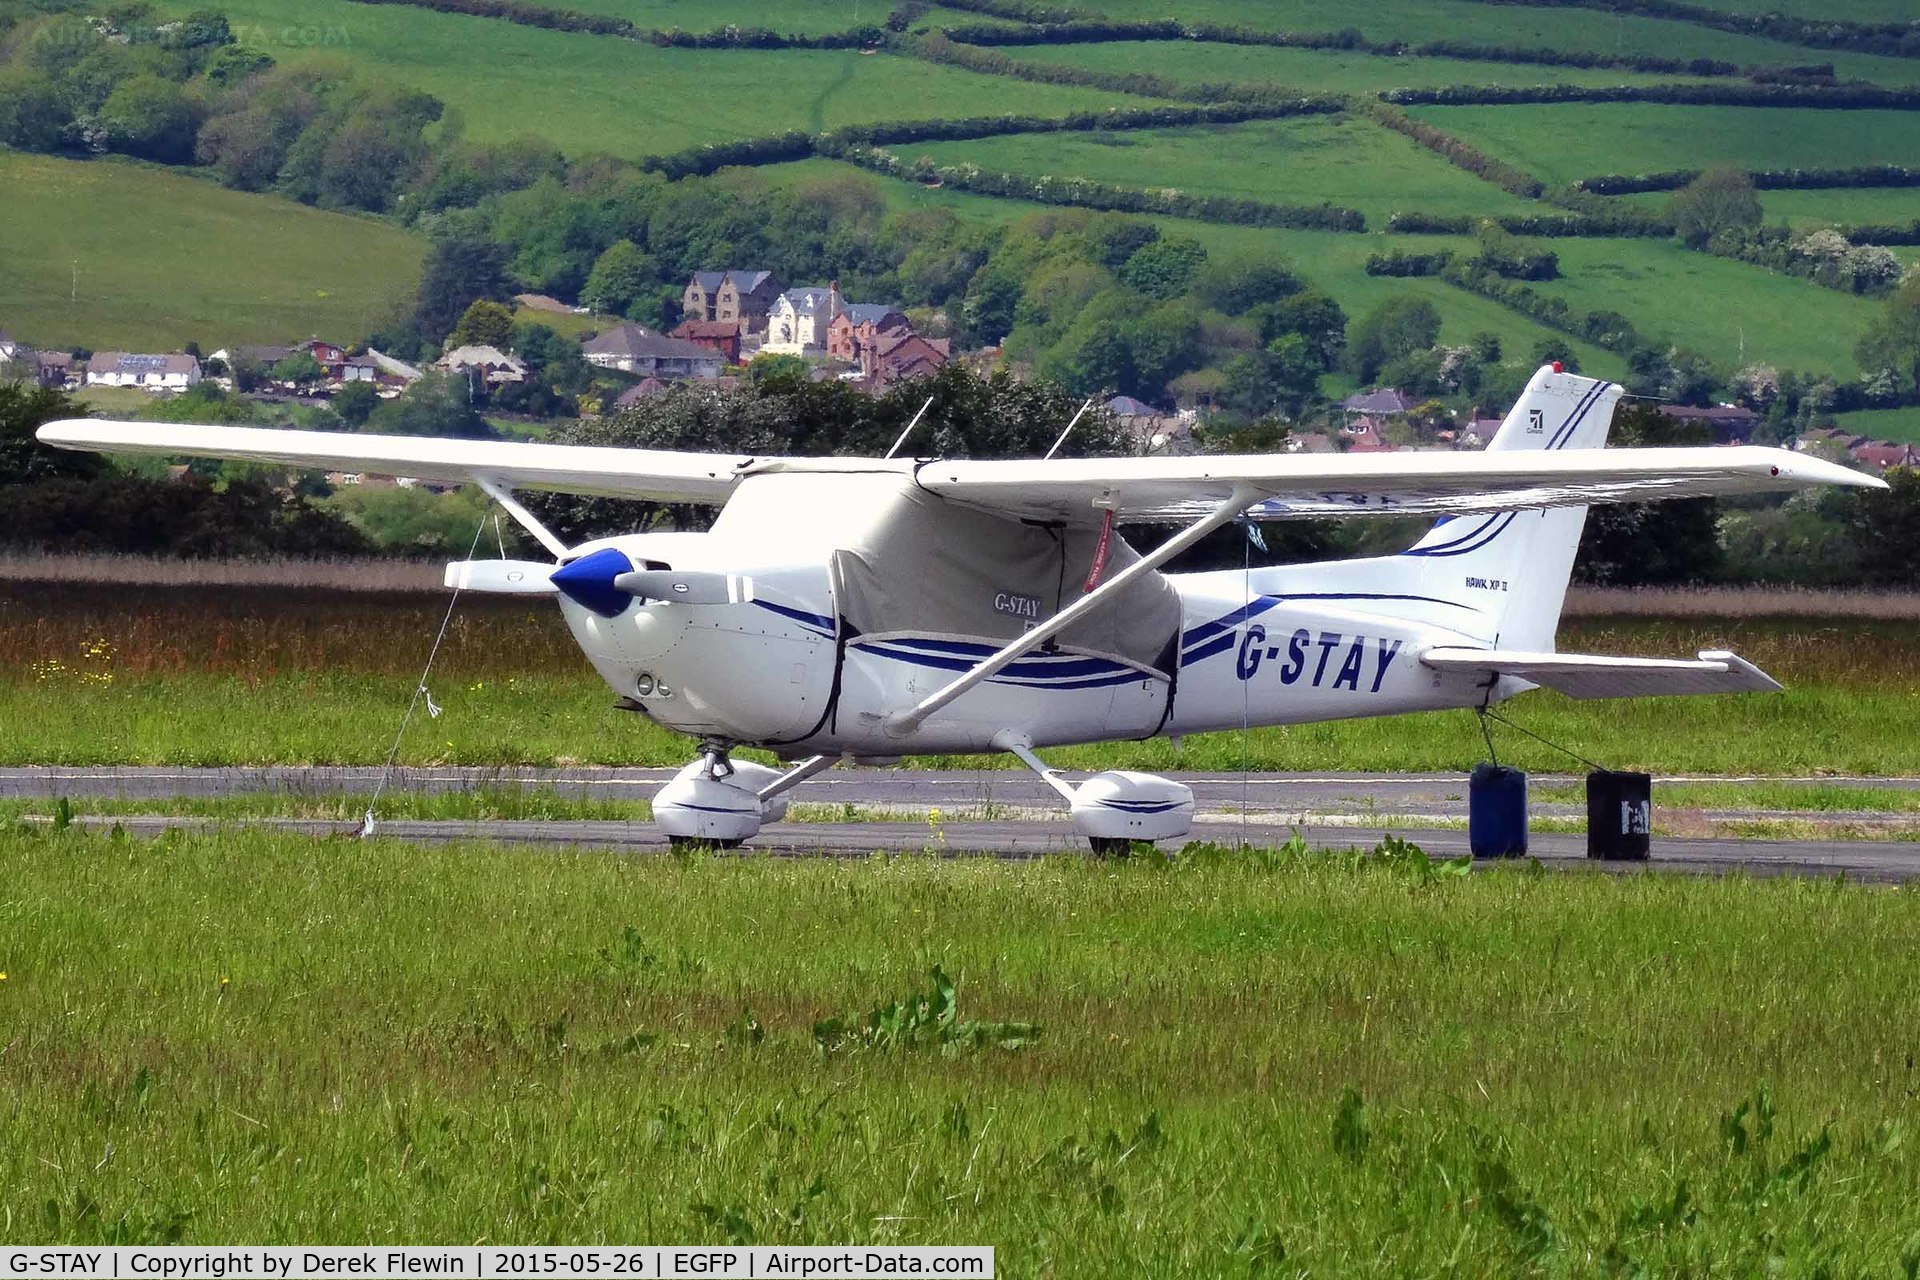 G-STAY, 1977 Reims FR172K Hawk XP C/N 0620, Reims Hawk XP, Haverfordwest based, previously OE-DVX, D-EOVX, seen parked up.